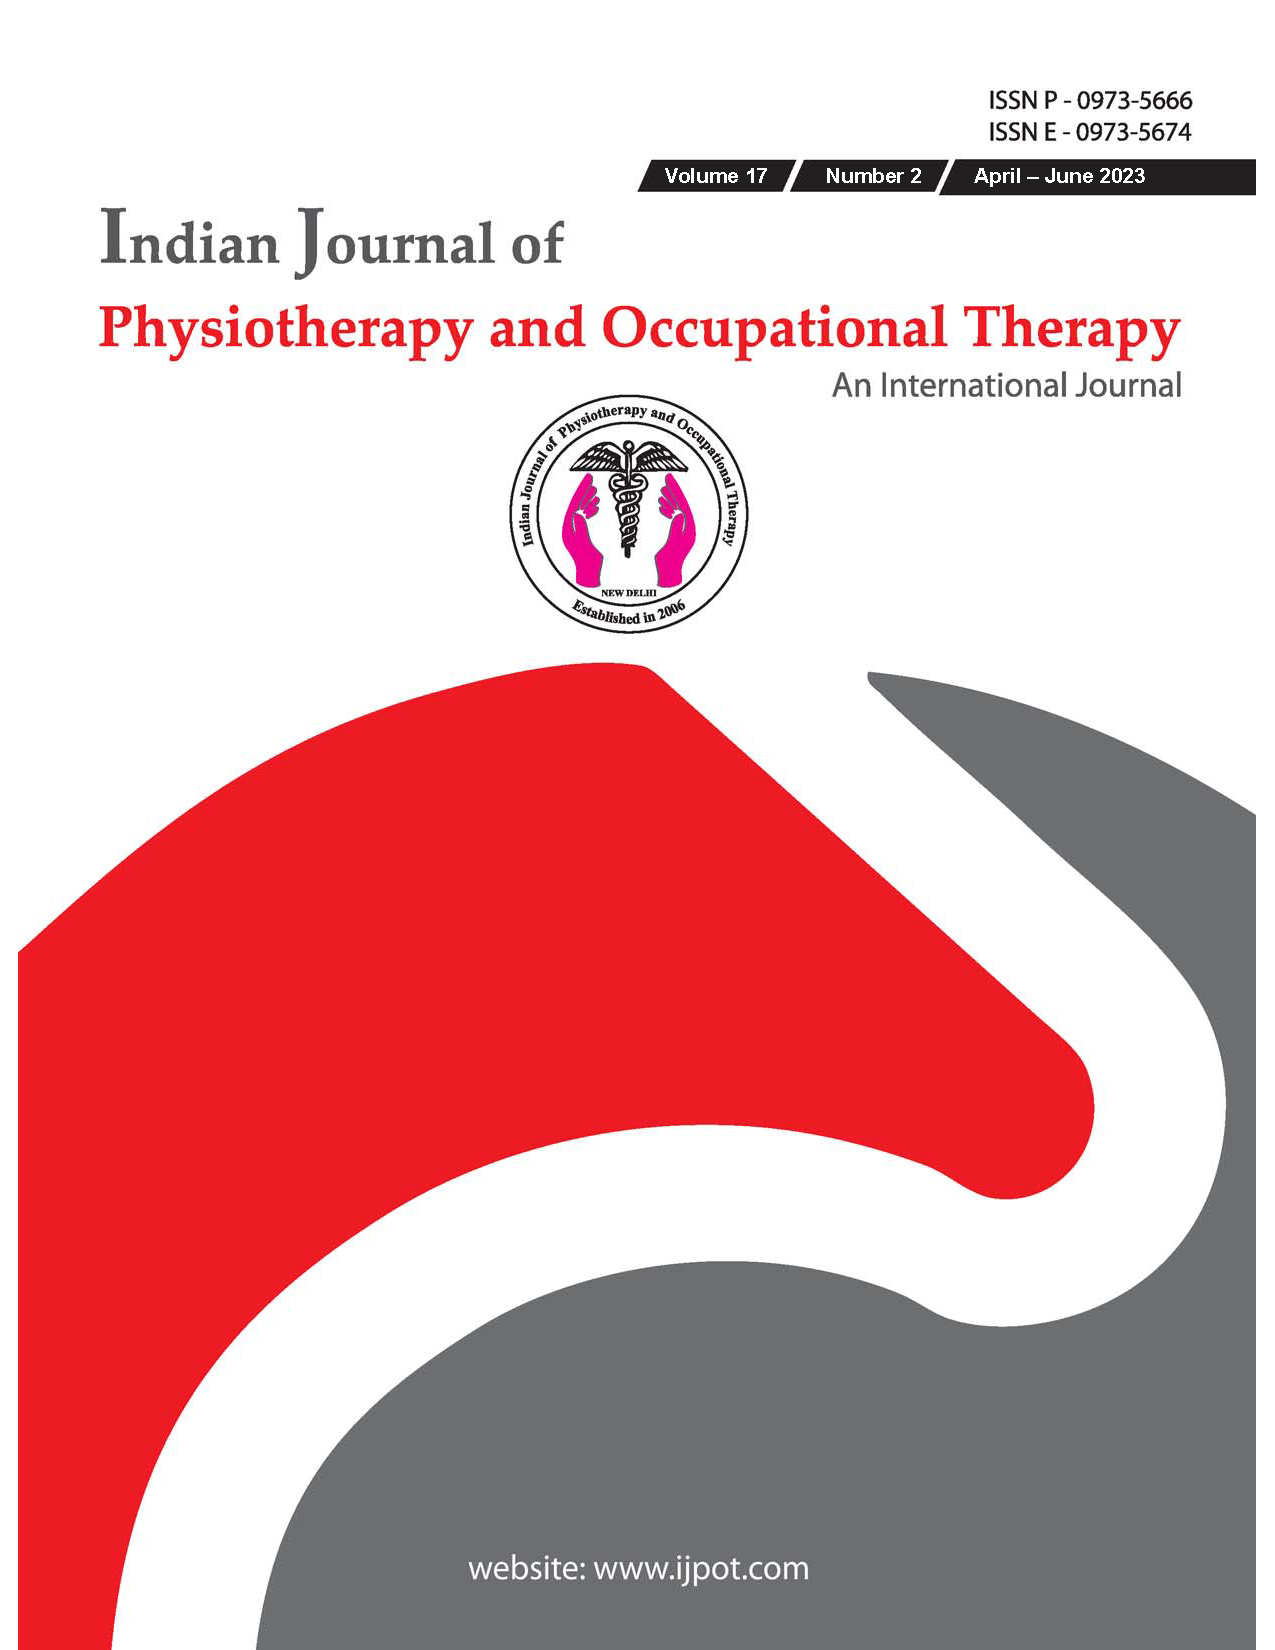 					View Vol. 17 No. 2 (2023):  Indian Journal of Physiotherapy & Occupational Therapy
				